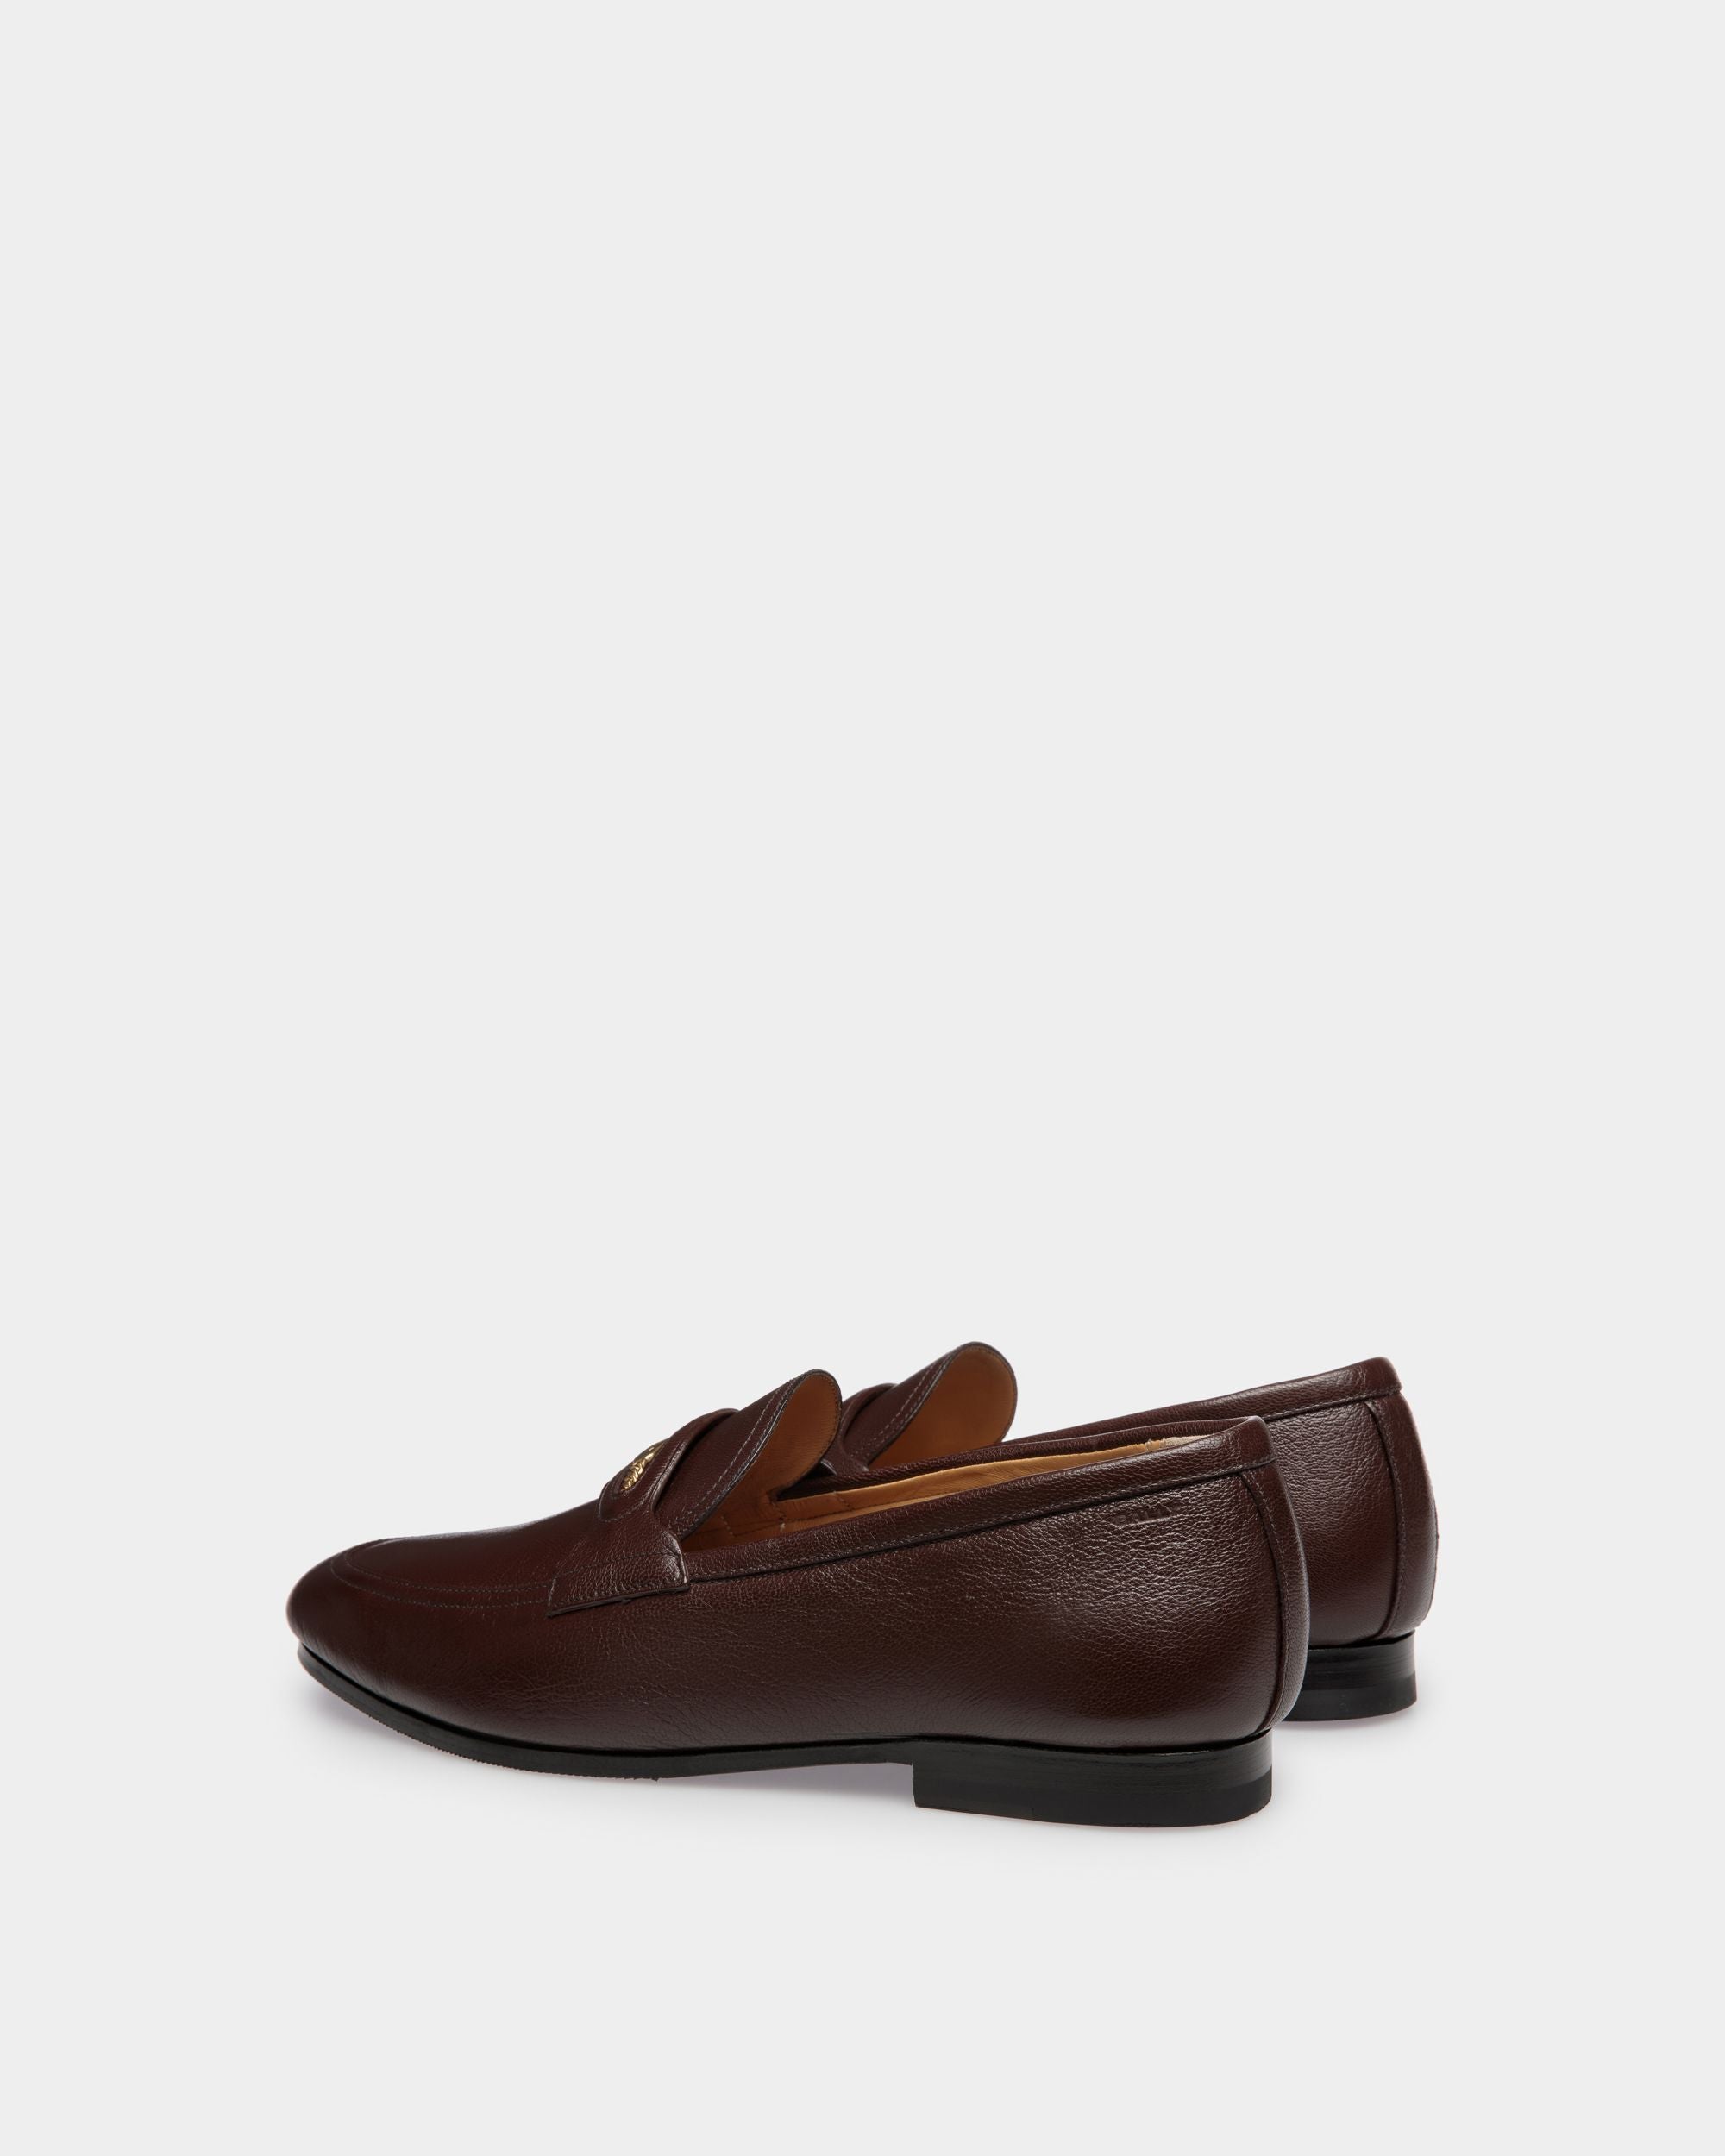 Plume | Men's Loafer in Brown Grained Leather | Bally | Still Life 3/4 Front